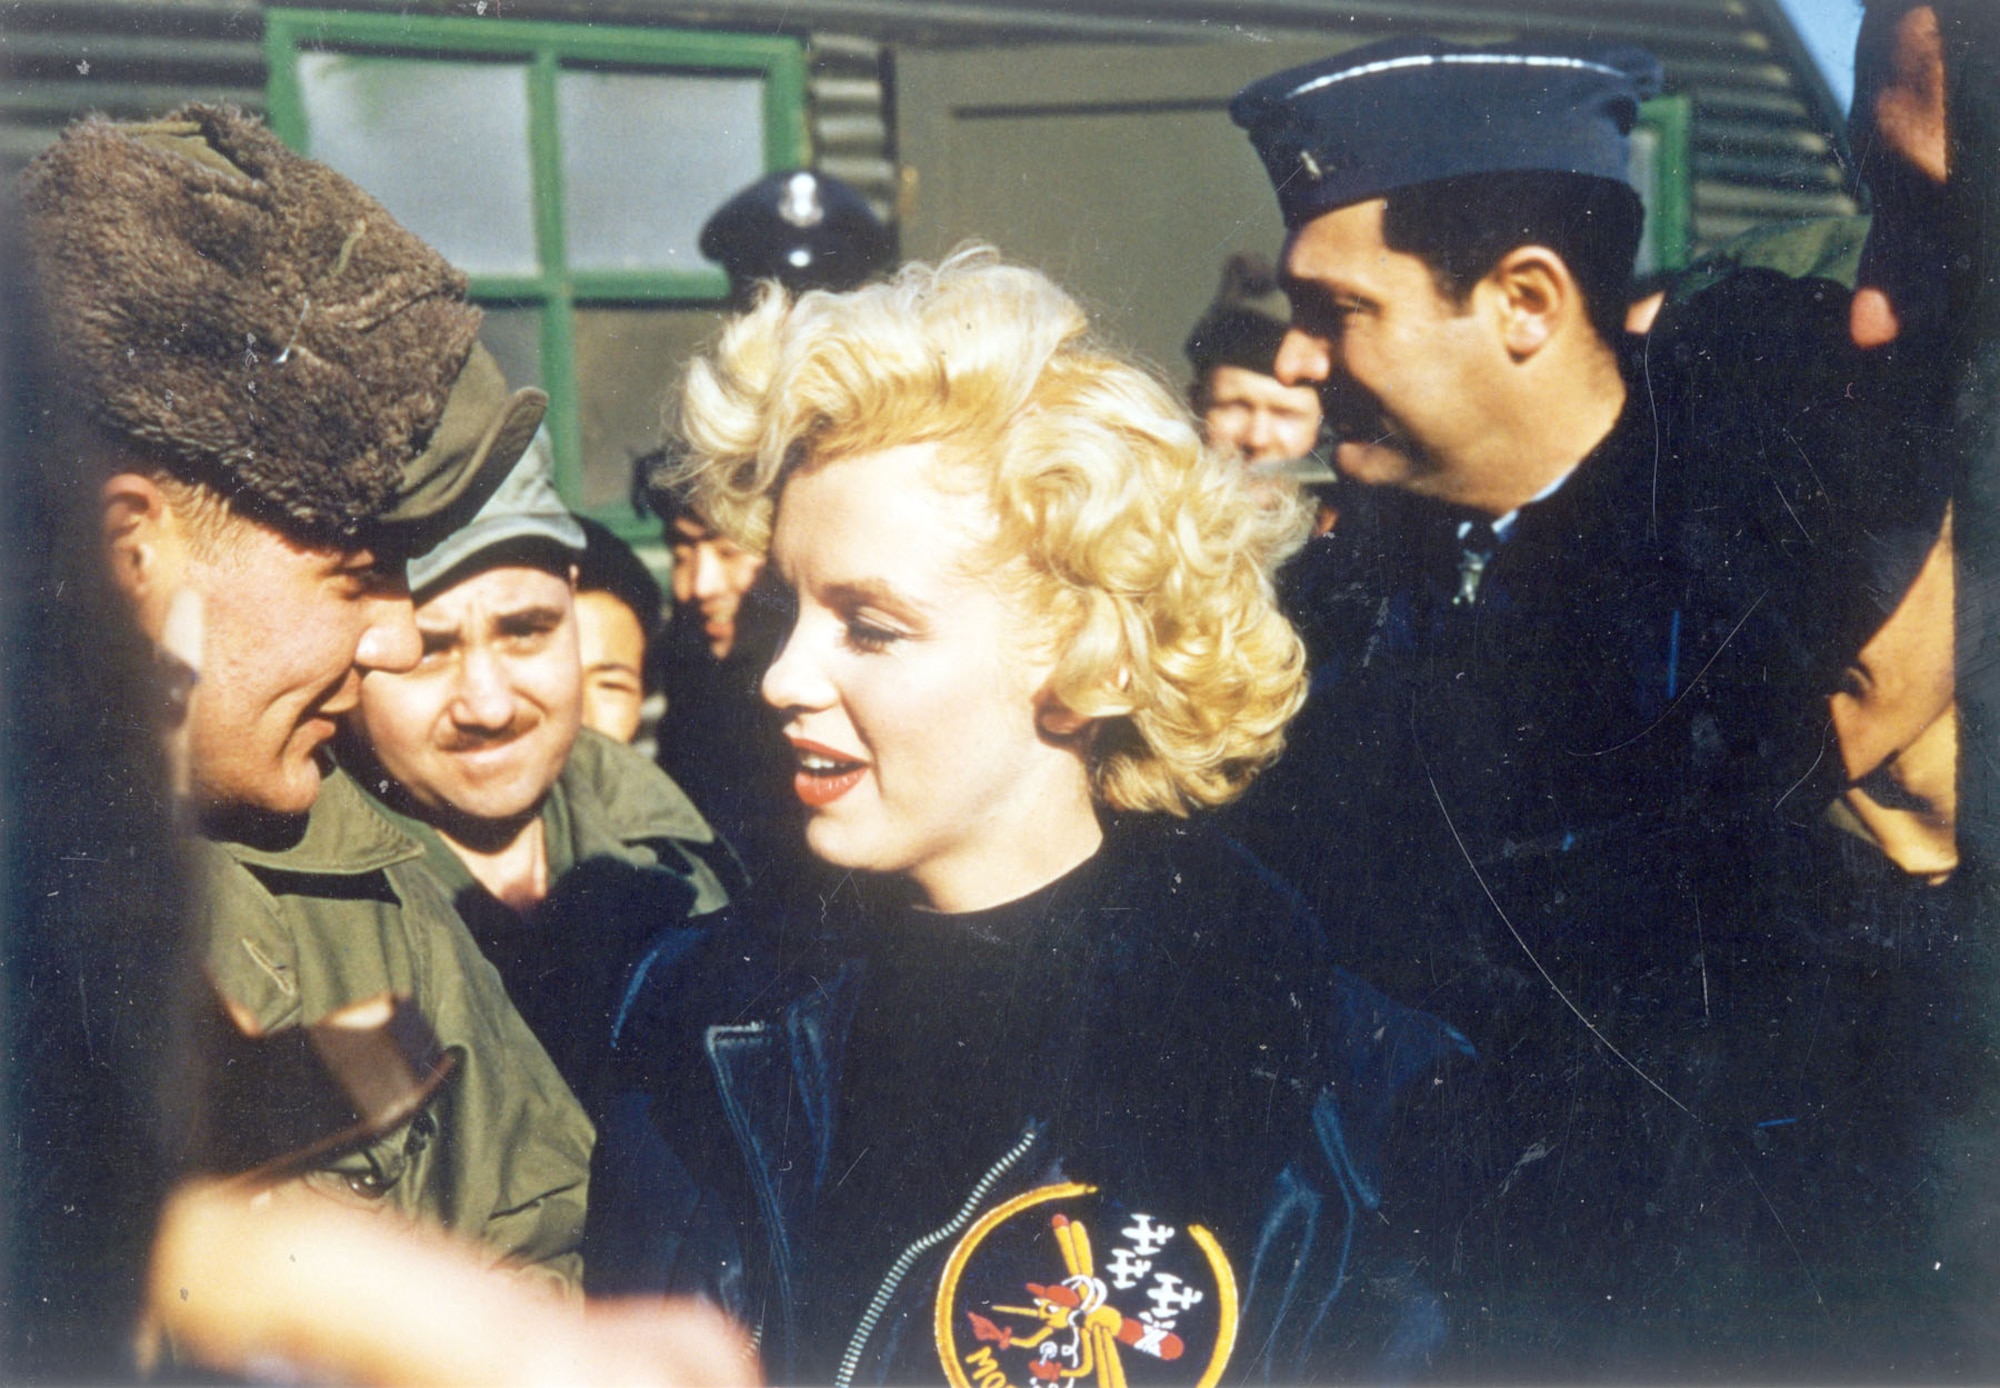 USO personnel and celebrities visited service members in Korea. Baseball player Joe DiMaggio and actress Marilyn Monroe famously toured Korea shortly after the Armistice. Here, Monroe is among Air Force personnel and wearing a 6147th Tactical Control Group jacket. (U.S. Air Force photo)